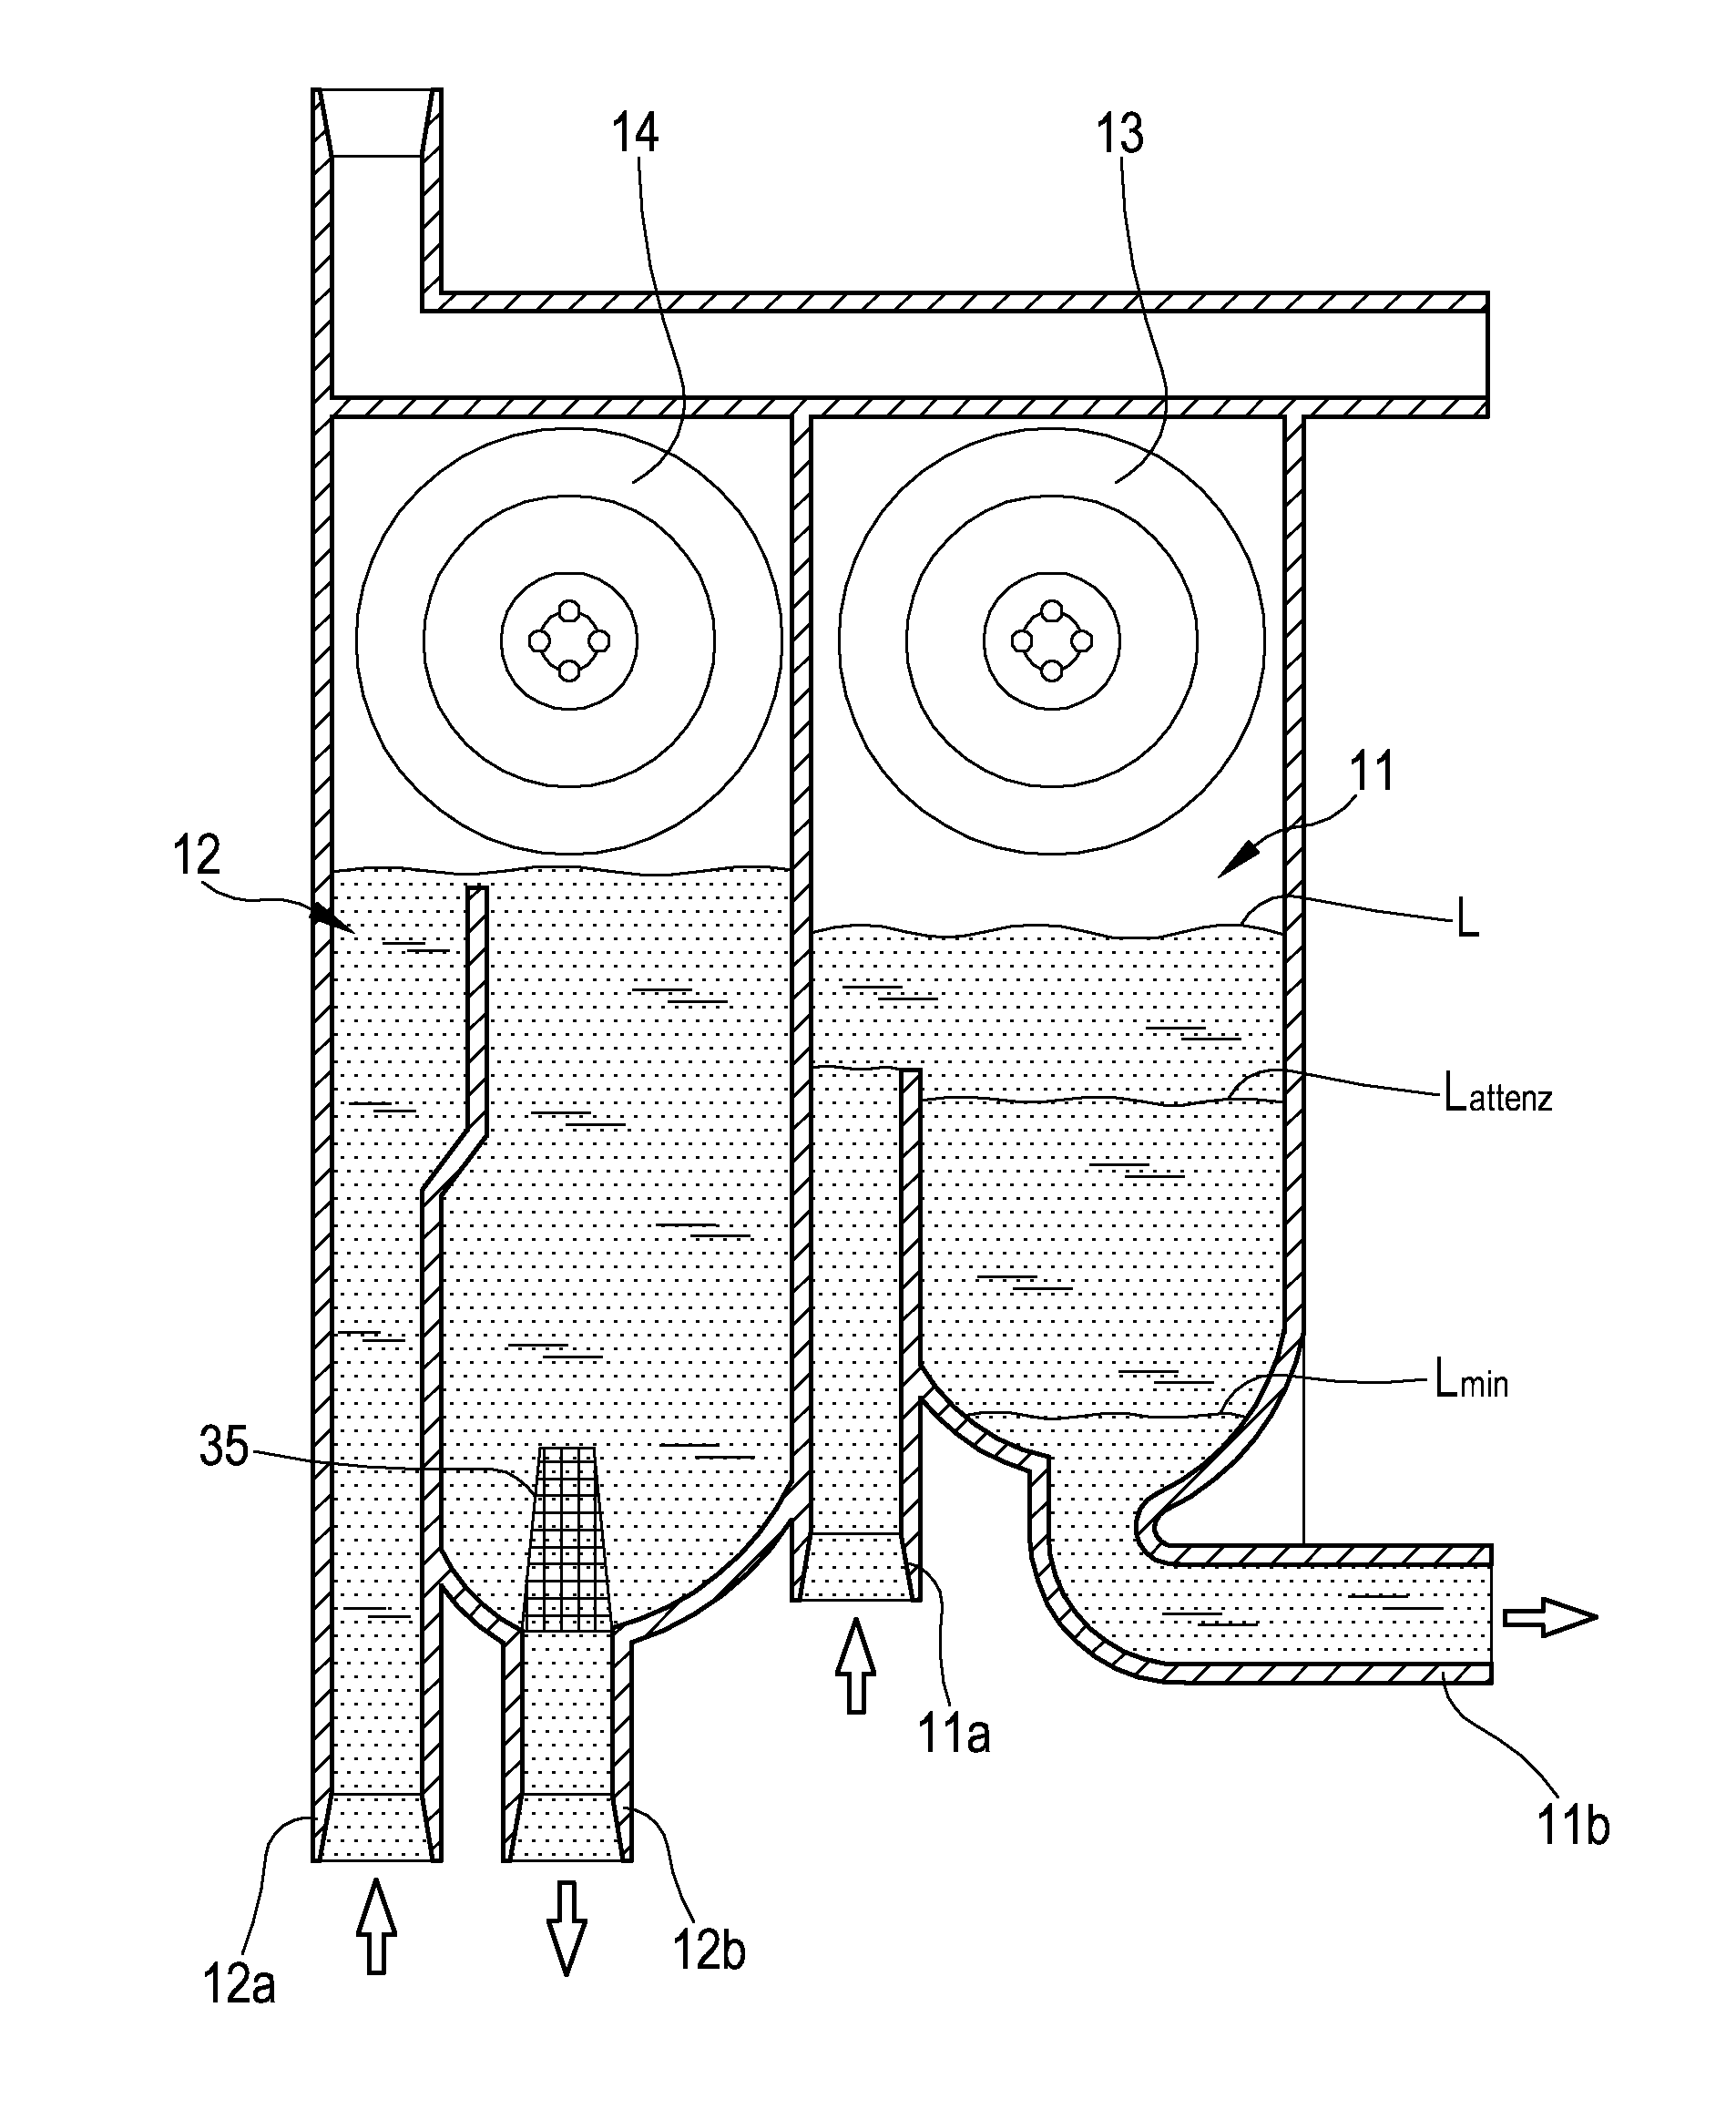 Apparatus and method of controlling an extracorporeal blood treatment